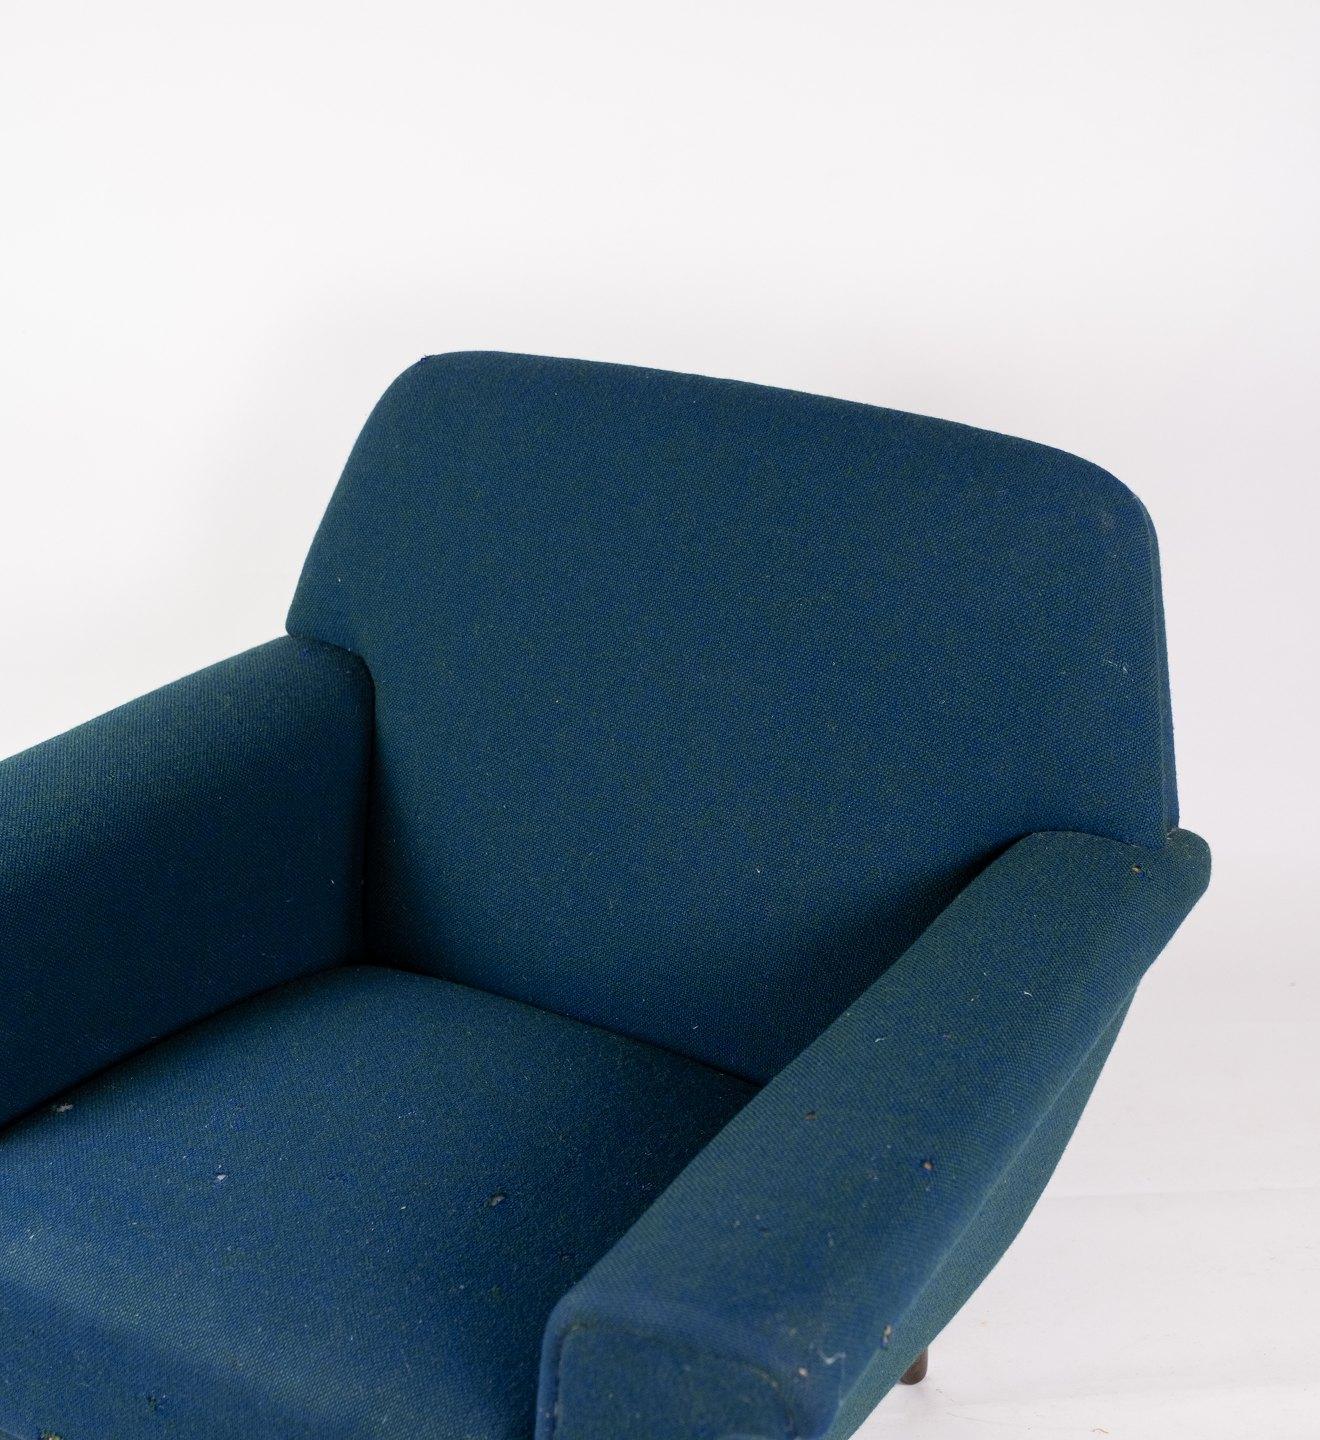 Armchair upholstered with dark blue wool fabric and legs in dark wood, of Danish design manufactured by Fritz Hansen in the 1960s. The chair is in great vintage condition.
Measures: H 75 cm, W 88 cm, D 50 cm and SH 38 cm.